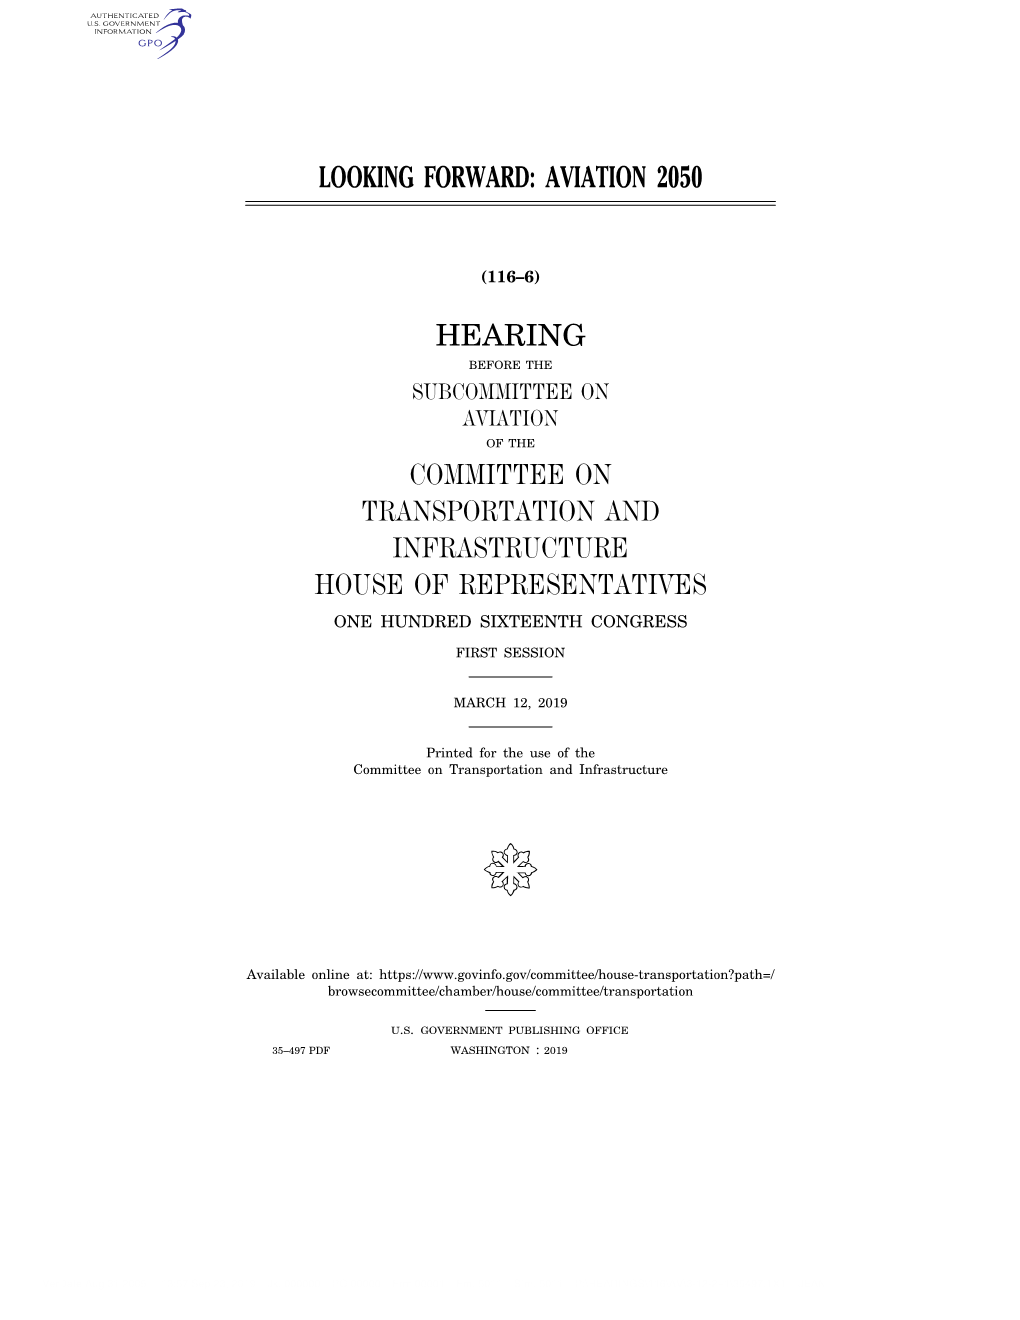 Aviation 2050 Hearing Committee On